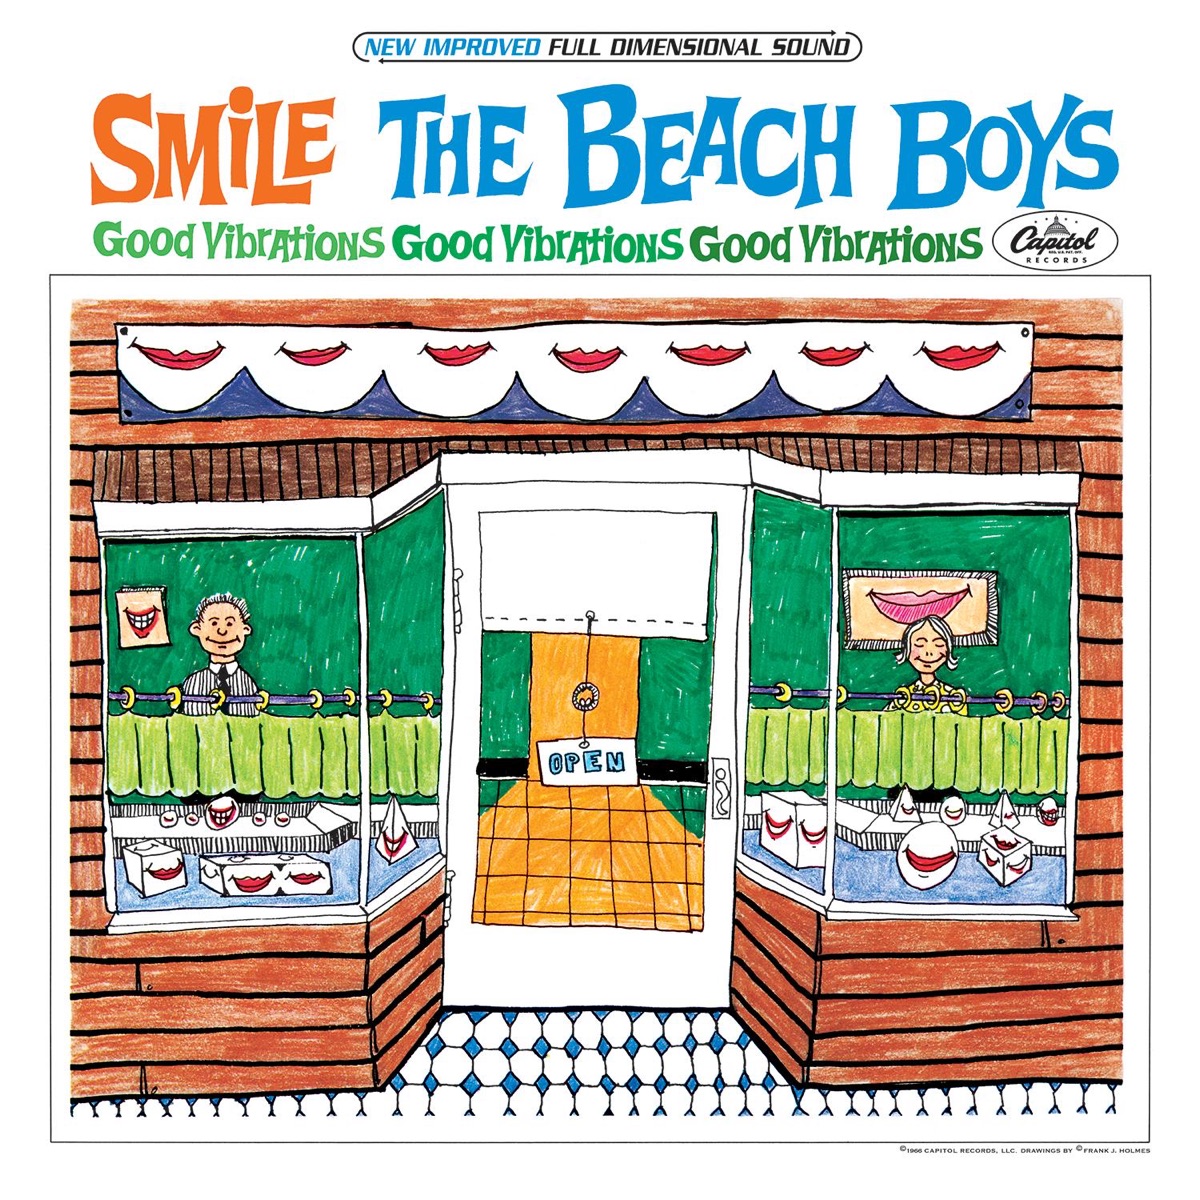 The Smile Sessions (Box Set) - Album by The Beach Boys - Apple Music